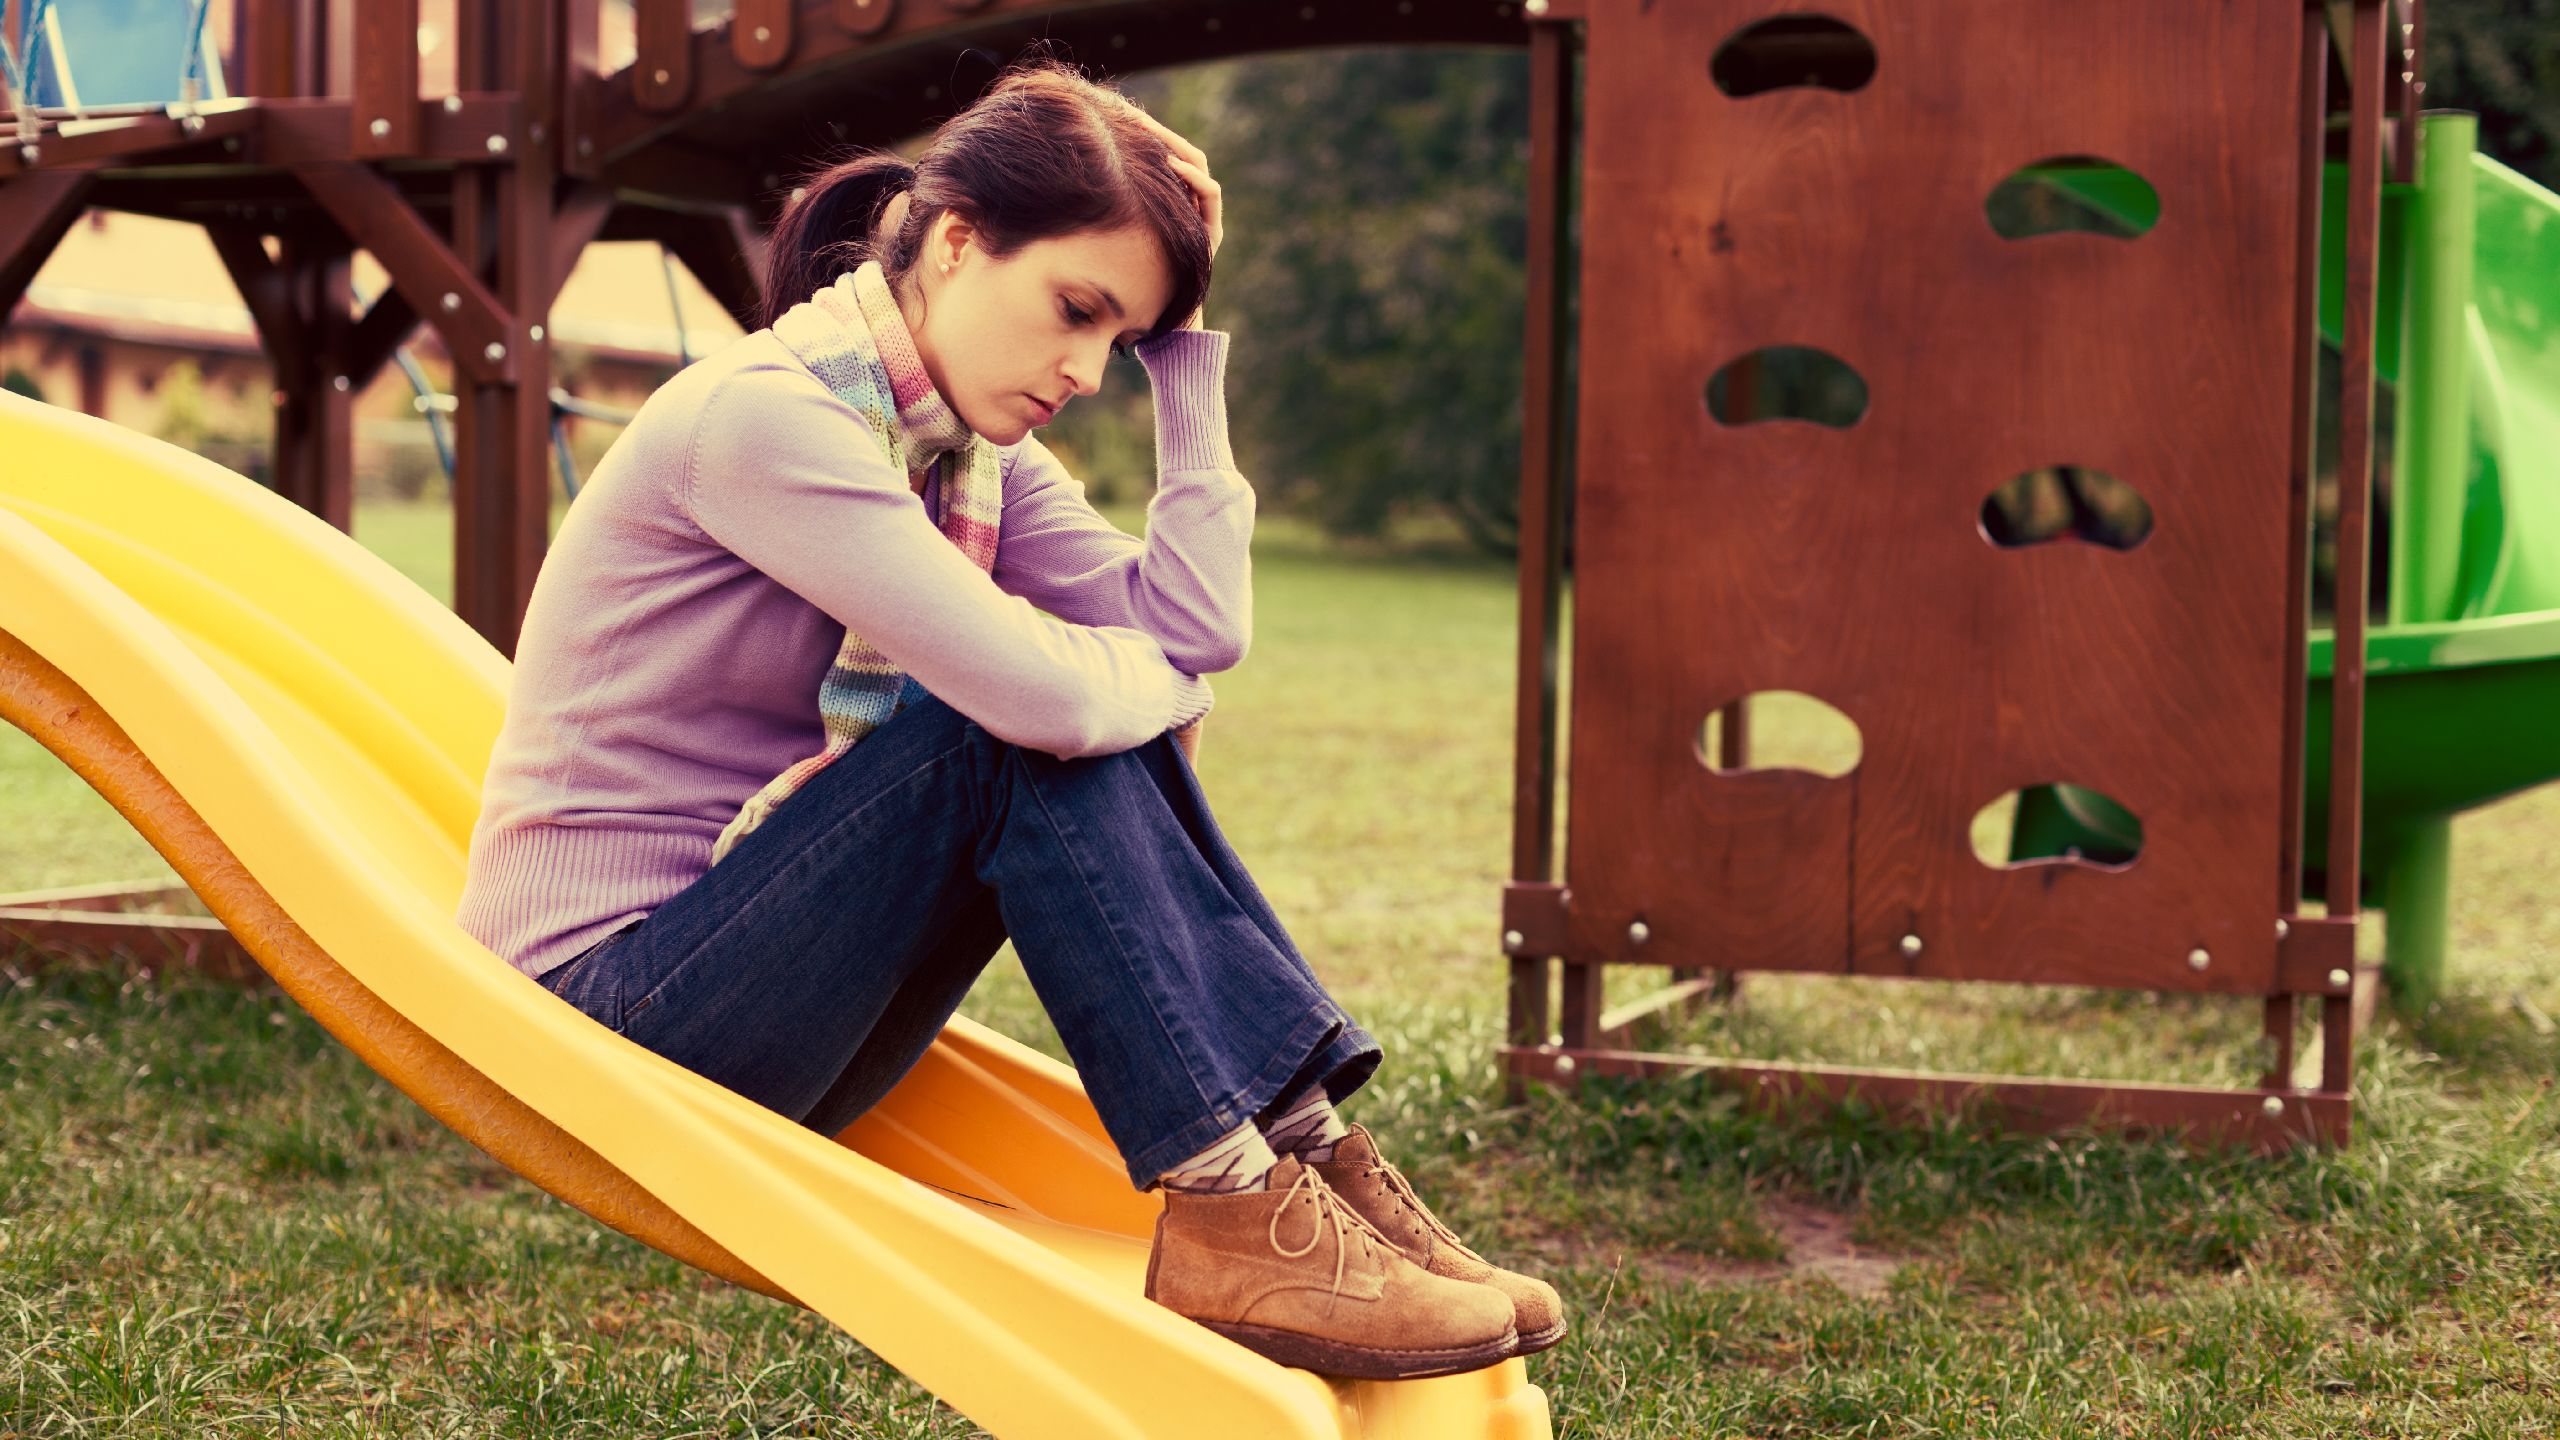 Sad young woman sitting on a children's slide with head in hands. 